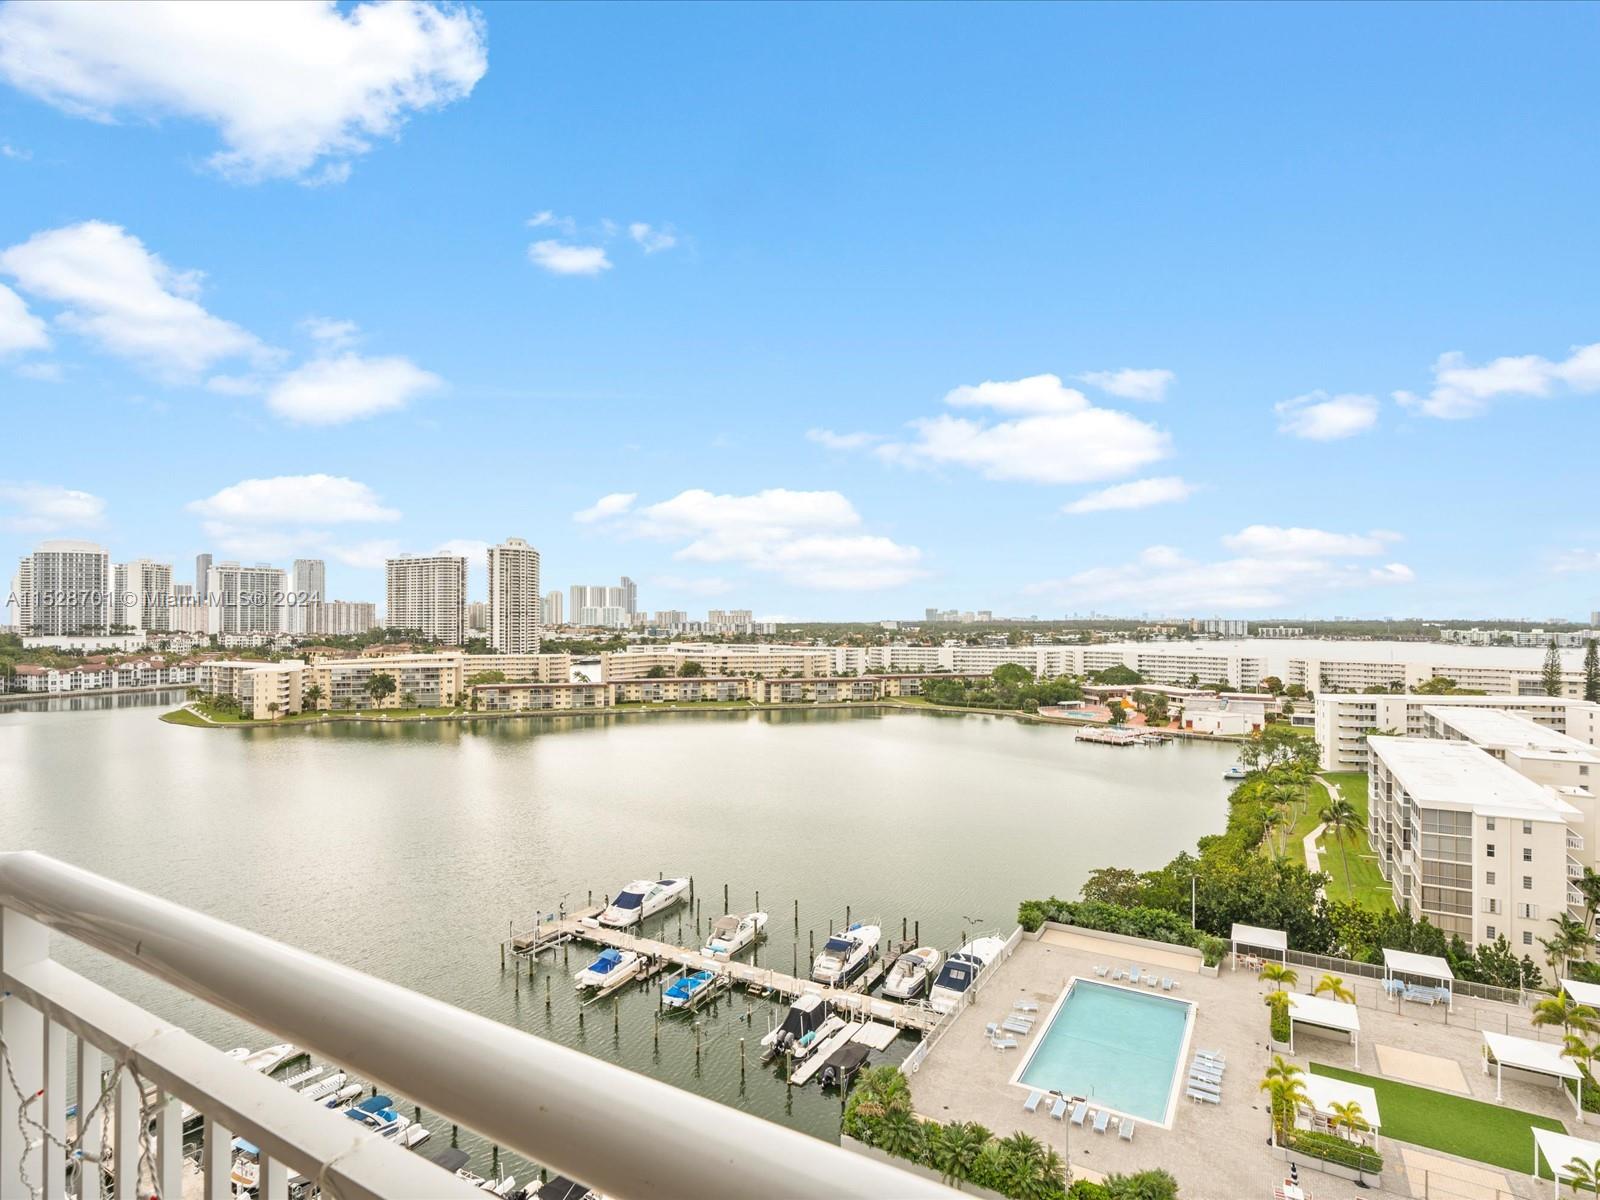 Stunning LARGEST UNIT IN THE BUILDING!!  4-bed, 3-bath, 3 balconies waterfront condo in Aventura. Boasting 2387 Sq. Ft. of refined living space, it features unique upgrades throughout. The layout includes a spacious living room, a high-end open kitchen, four large bedrooms, three modern bathrooms, and ample closet space. Three private balconies offer stunning N & S views, inviting relaxation and enjoyment of the surroundings. Enjoy resort-style living with amenities such as a tennis court, state-of-the-art gym, private marina, and two swimming pools. Nestled in the heart of Aventura, it offers convenience with shops like Fresh Market and dining options nearby—minutes from Sunny Isles Beach, Aventura Mall, highways, and esteemed schools.